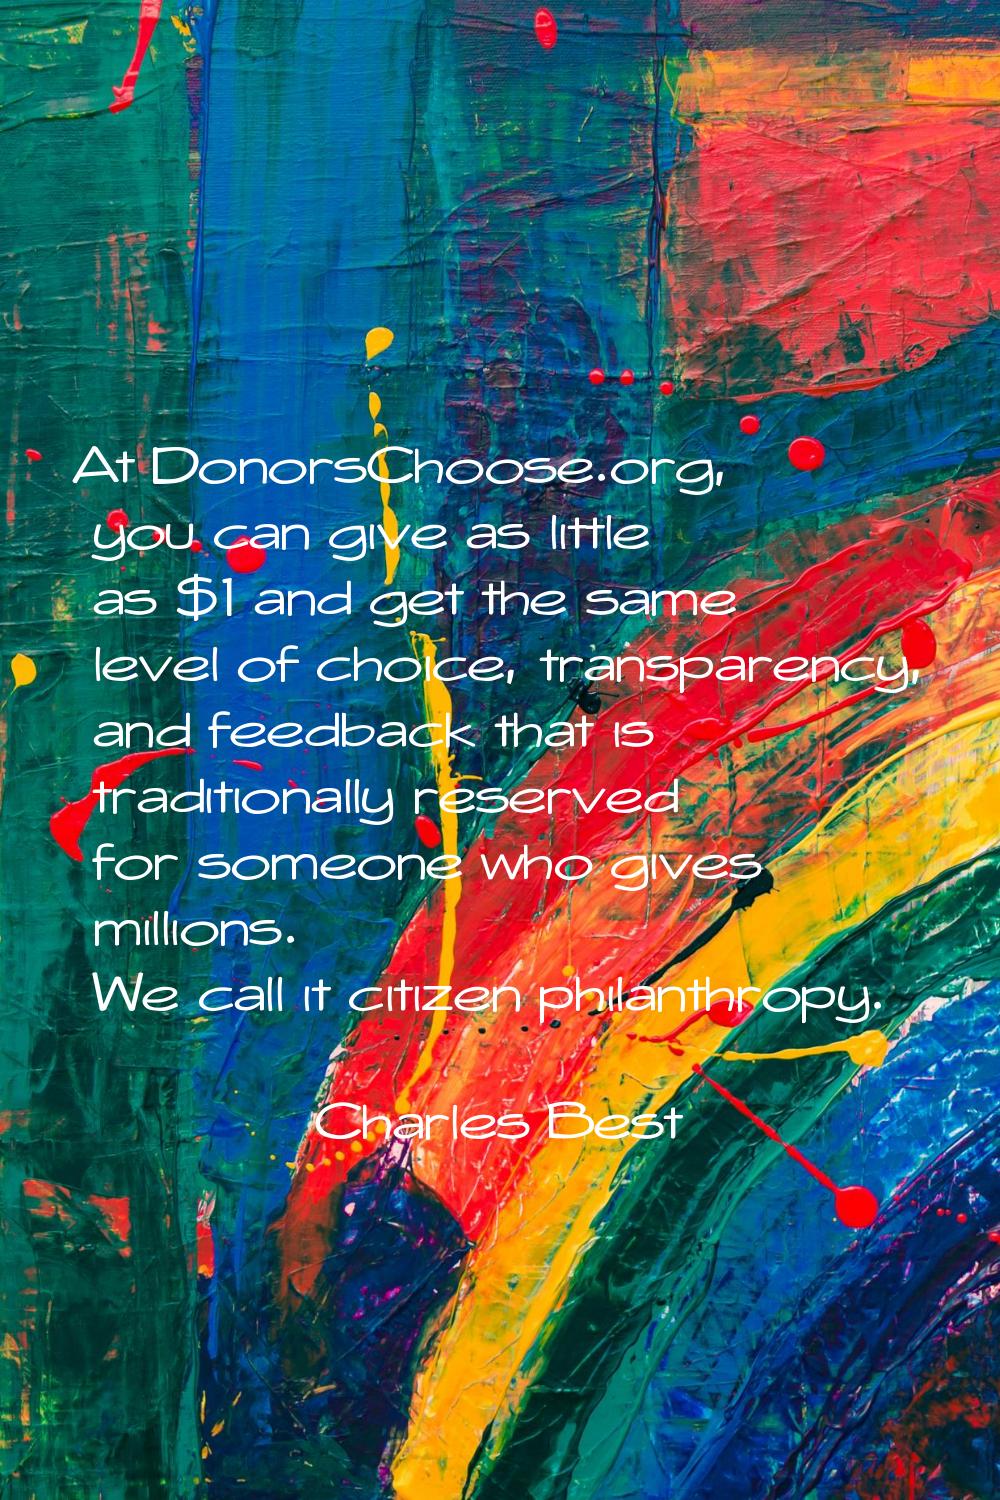 At DonorsChoose.org, you can give as little as $1 and get the same level of choice, transparency, a